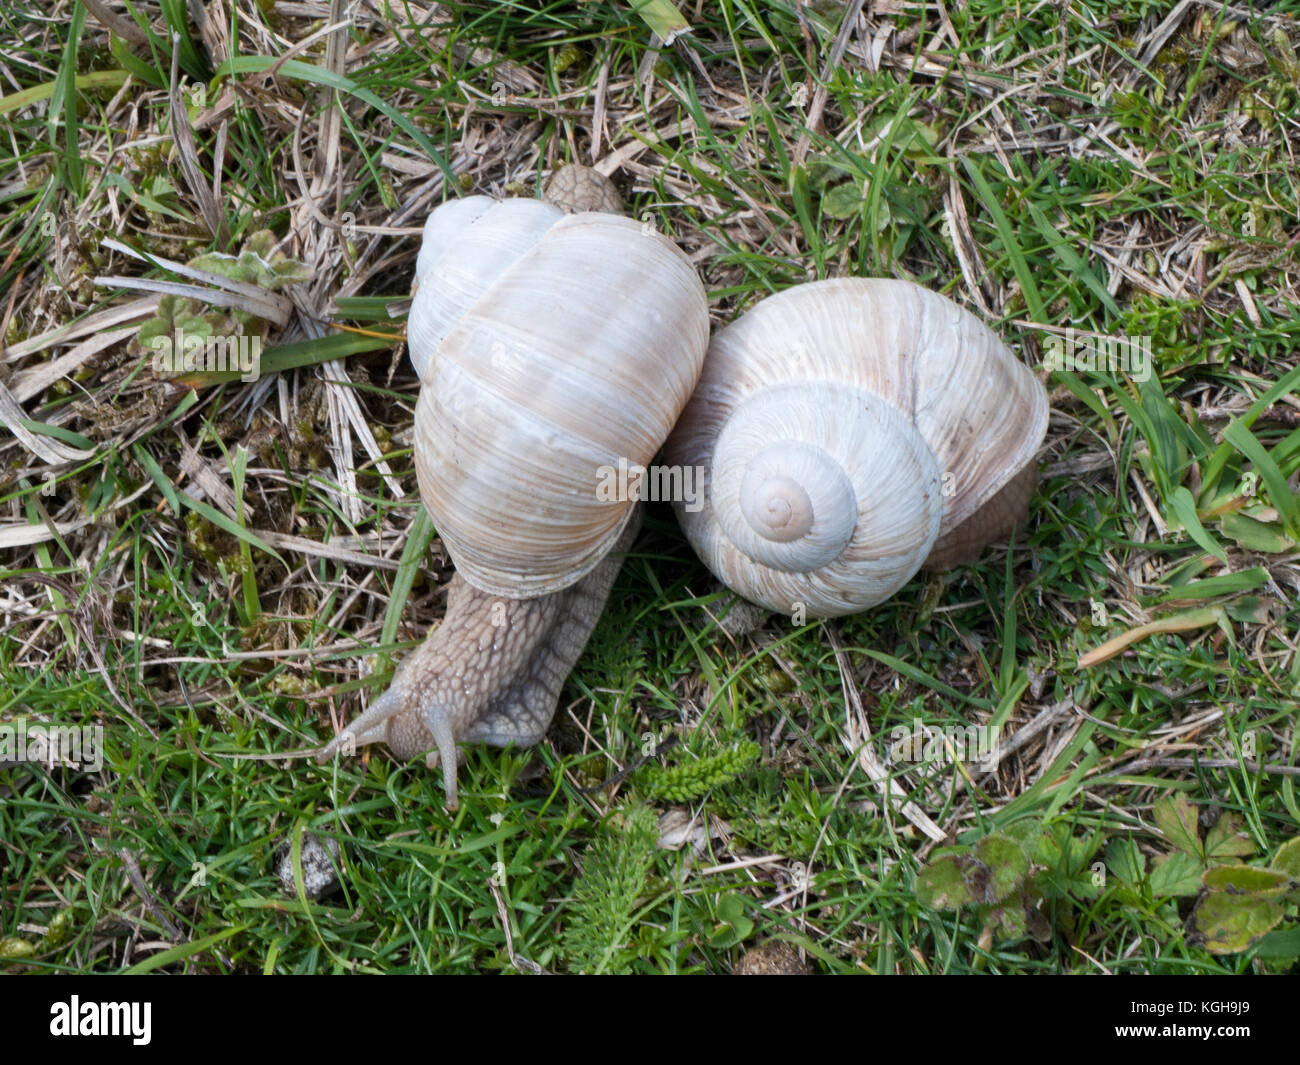 Roman Snail (Helix pomatia) introduced to Britain by the Romans, a protected species in the UK, also known as Burgundy Snail or escargot Stock Photo